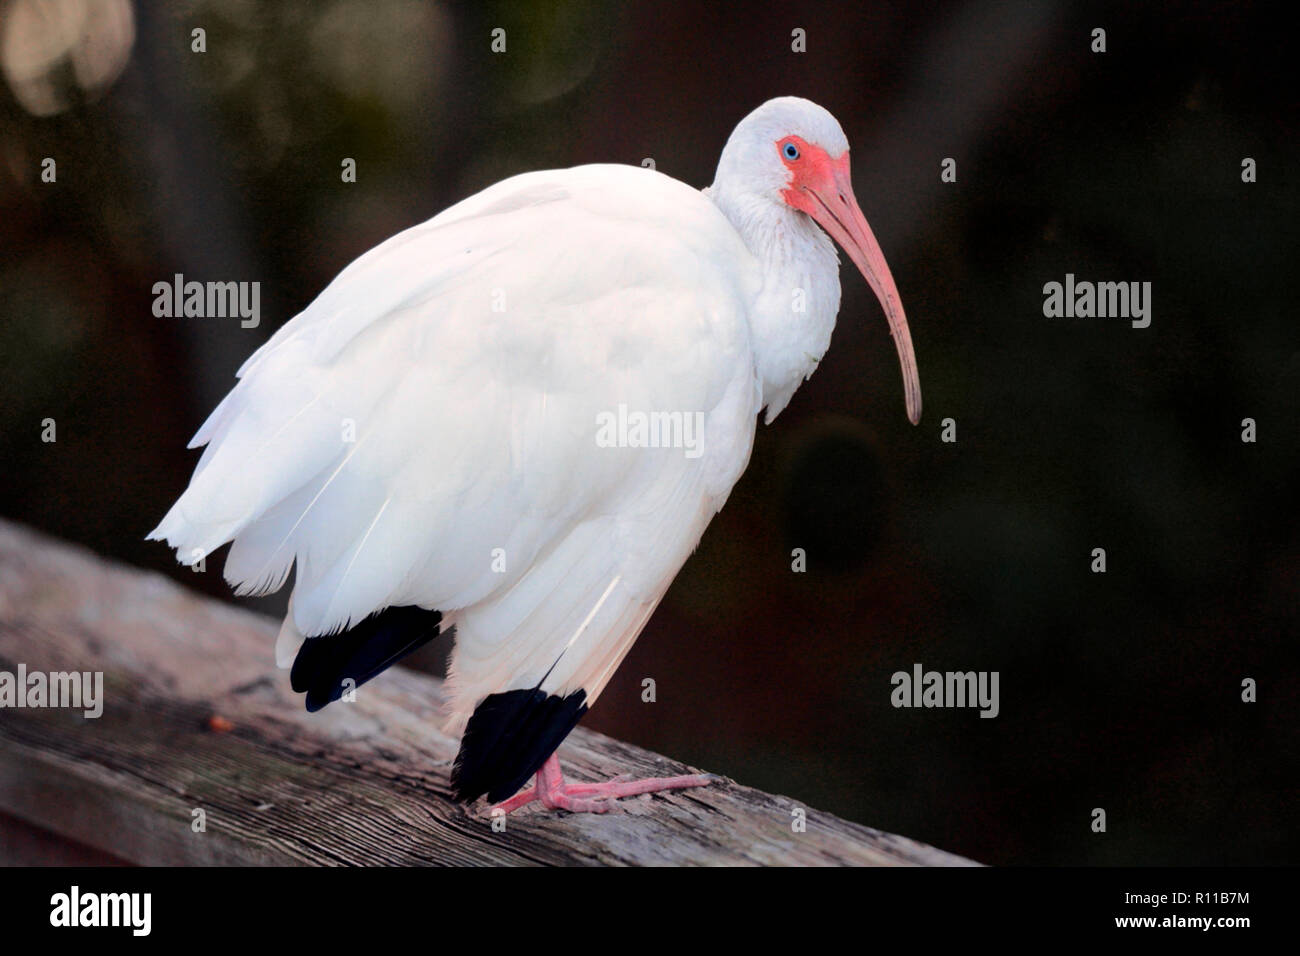 An White Ibis bird- Eudocimus albus, perched on a branch, pictured against a blurred background.They are found usually in coastal wetlands. Stock Photo